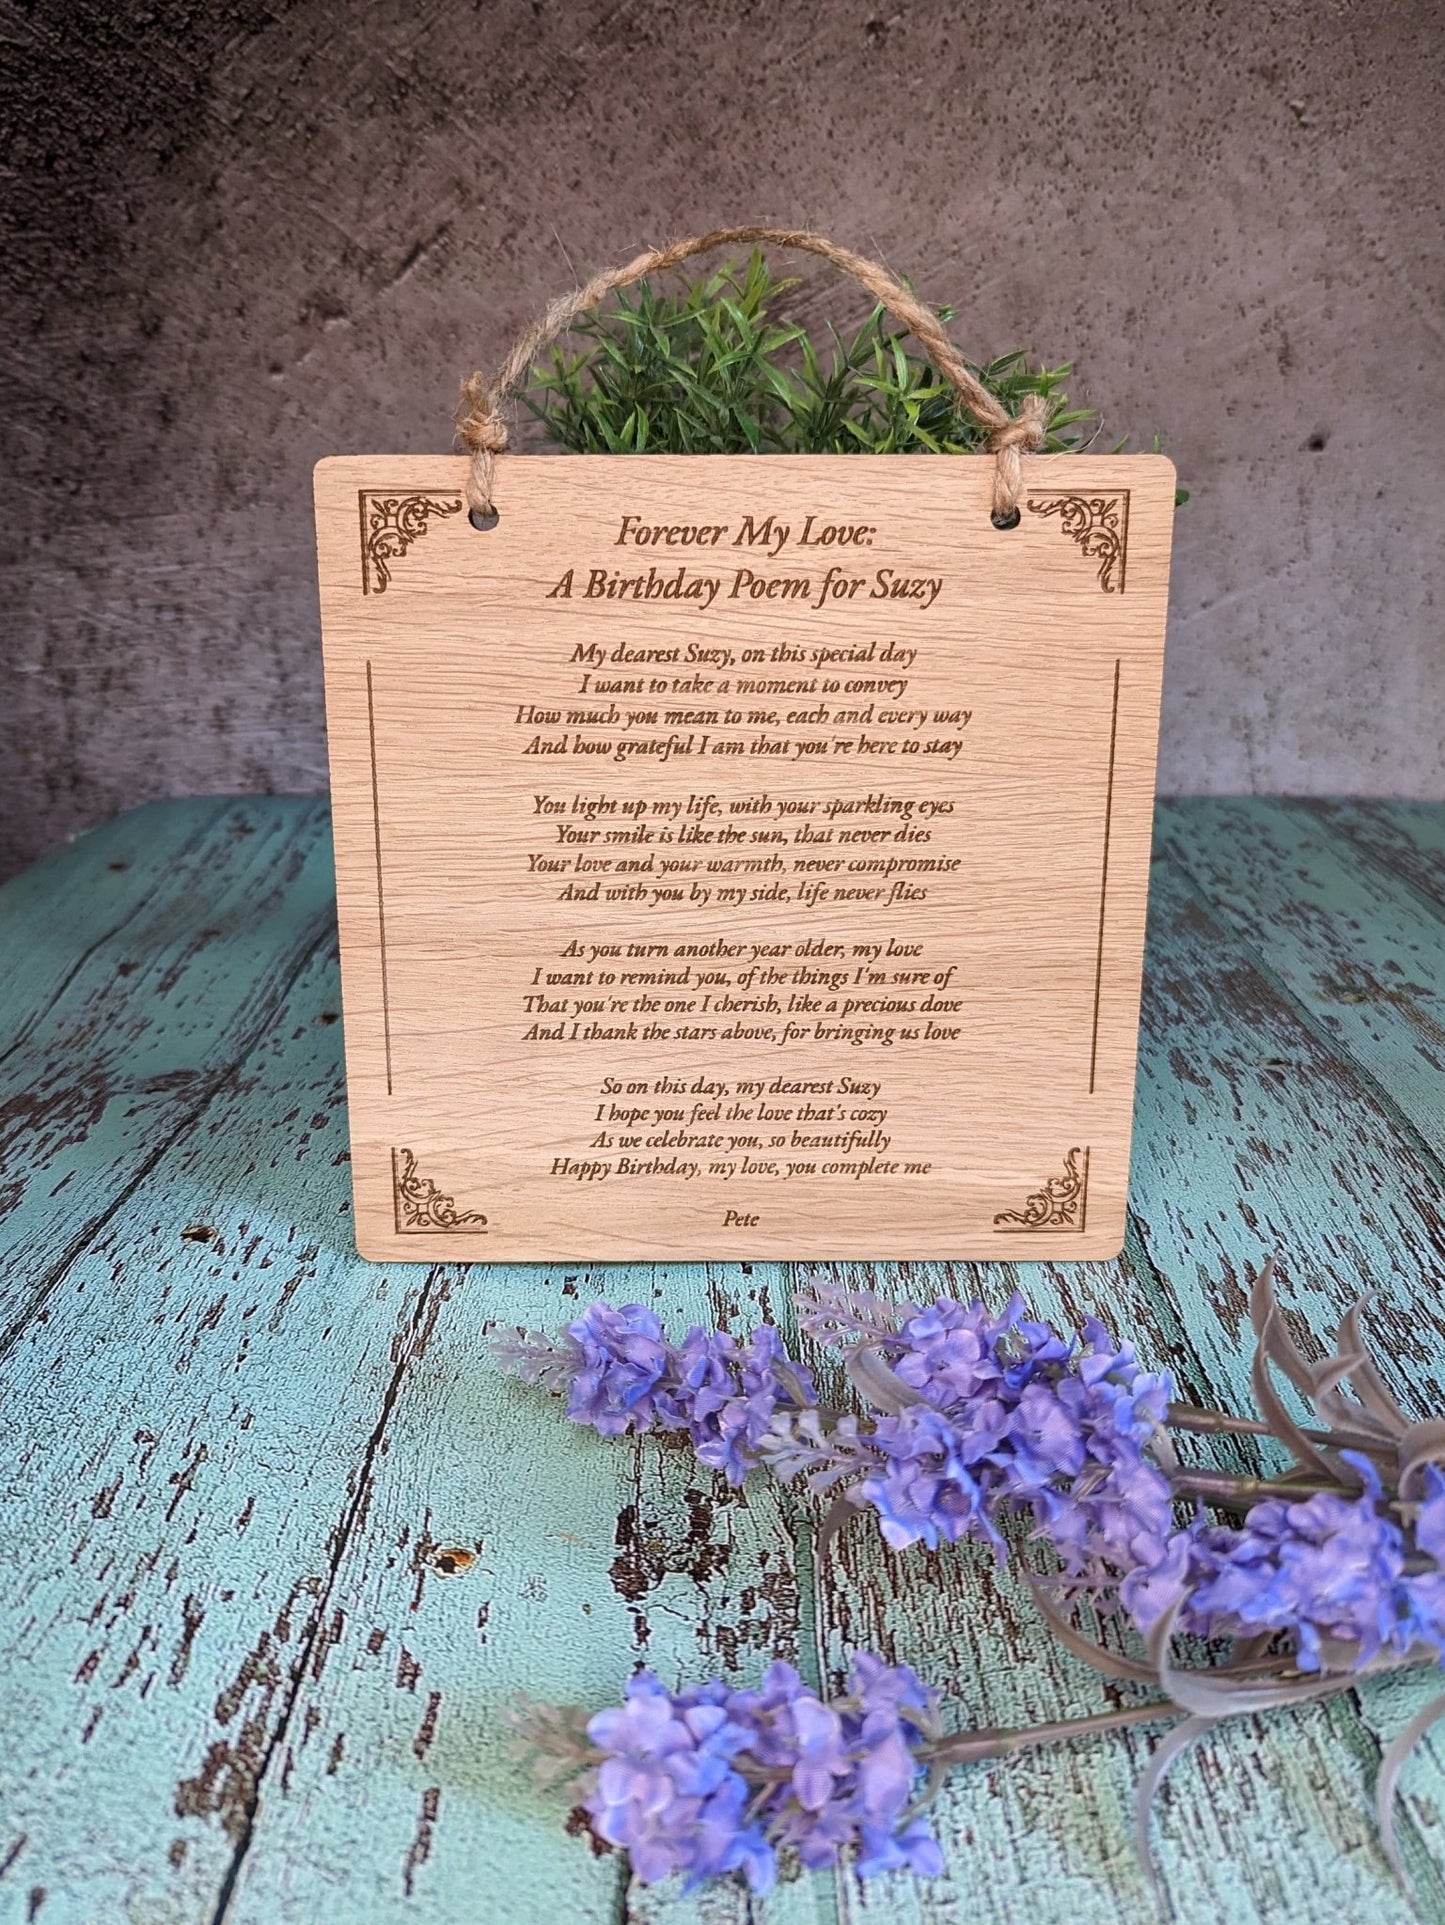 Extra Large Professional Poem Writing, Personalised Wooden Poem Sign - Custom Poem Gift for Anniversary, Wedding, Proposal, Fathers Day Gift - CherryGroveCraft